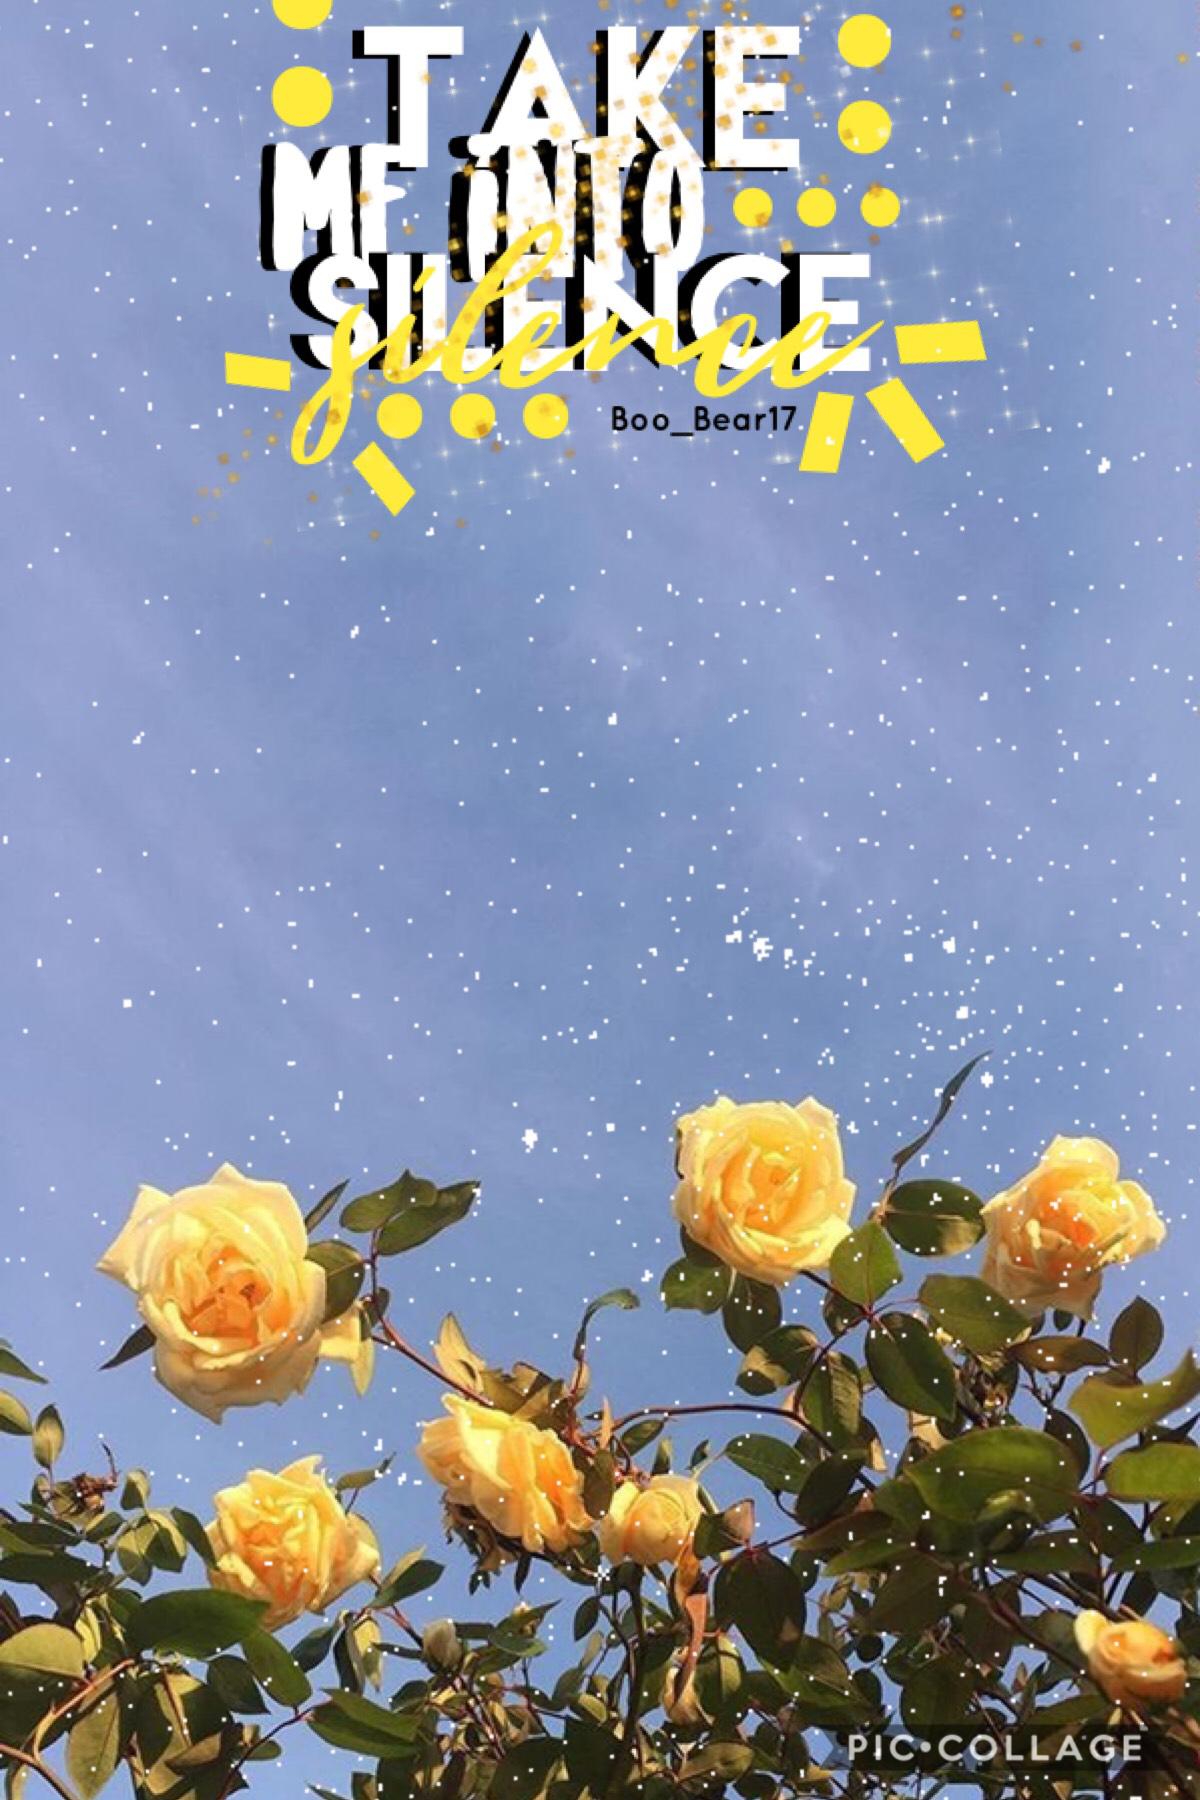 💛take me into silence💛
•I went to a band thug yesterday and the guest director who worked with us said this, and it stuck
•song rec: GONE by Paris and Trippie Redd